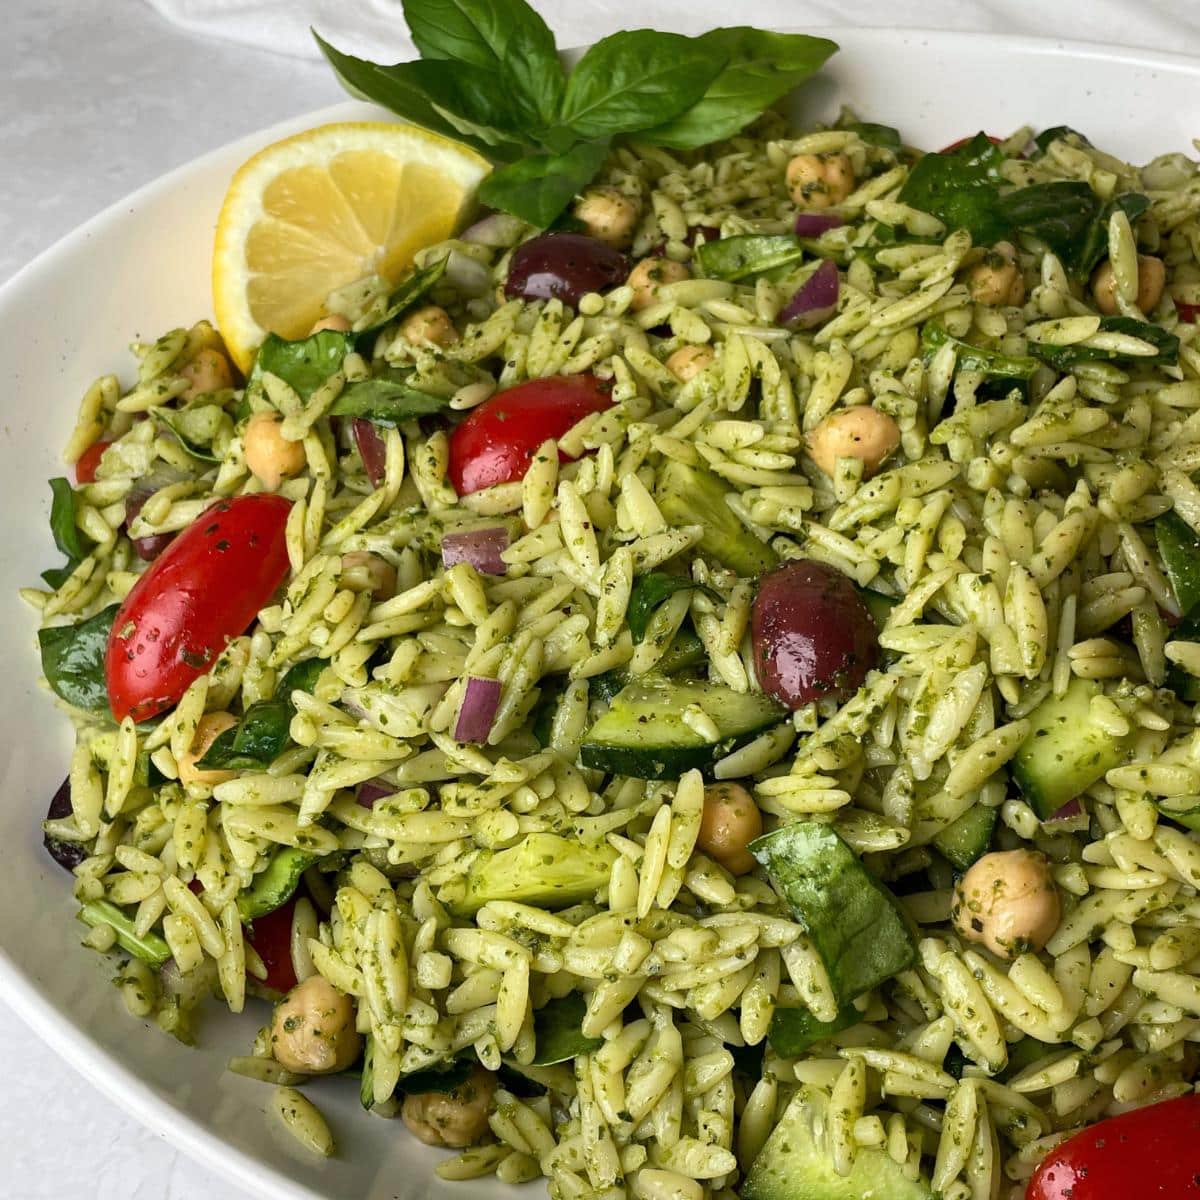 A plate with orzo pasta salad and pesto.